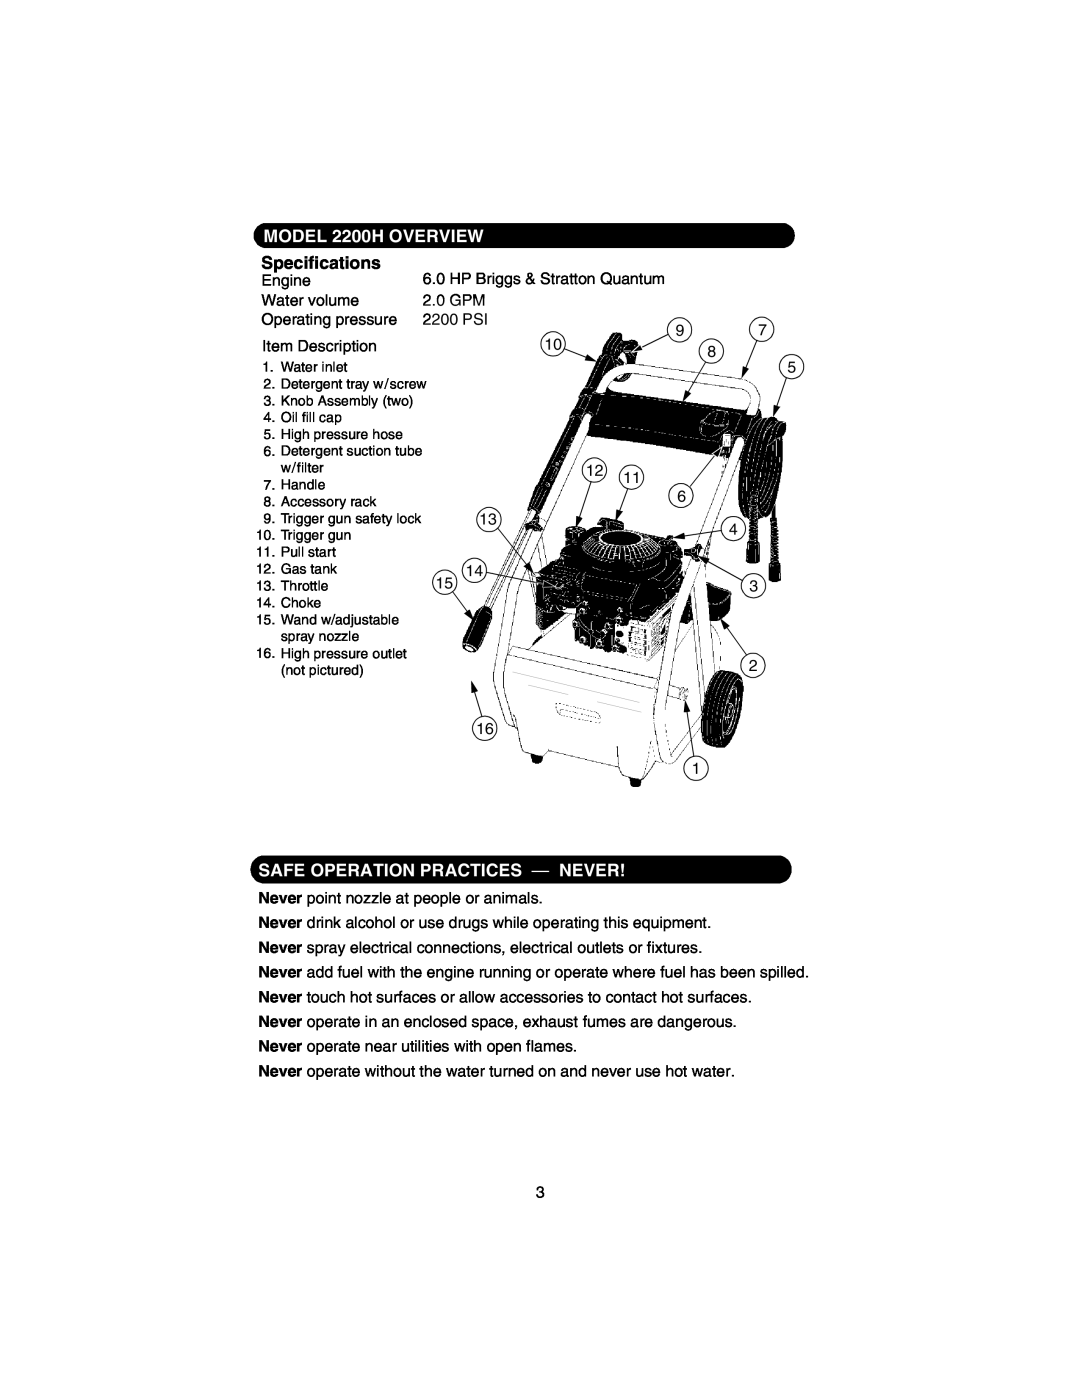 Cub Cadet manual MODEL 2200H OVERVIEW, Specifications, Safe Operation Practices — Never 